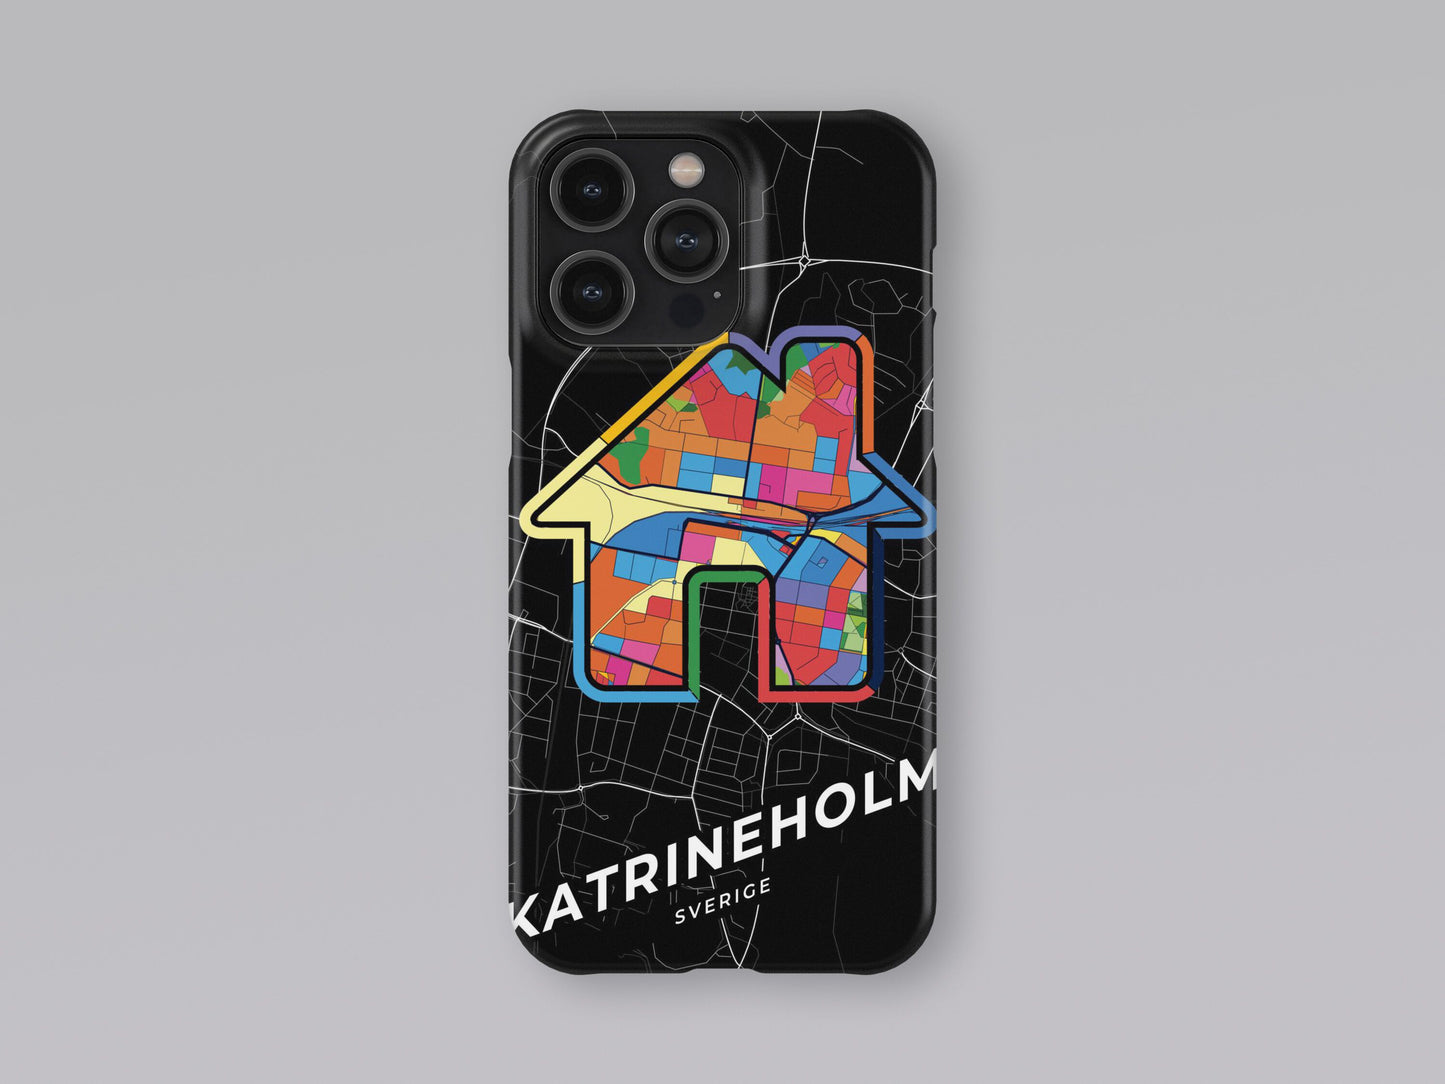 Katrineholm Sweden slim phone case with colorful icon. Birthday, wedding or housewarming gift. Couple match cases. 3